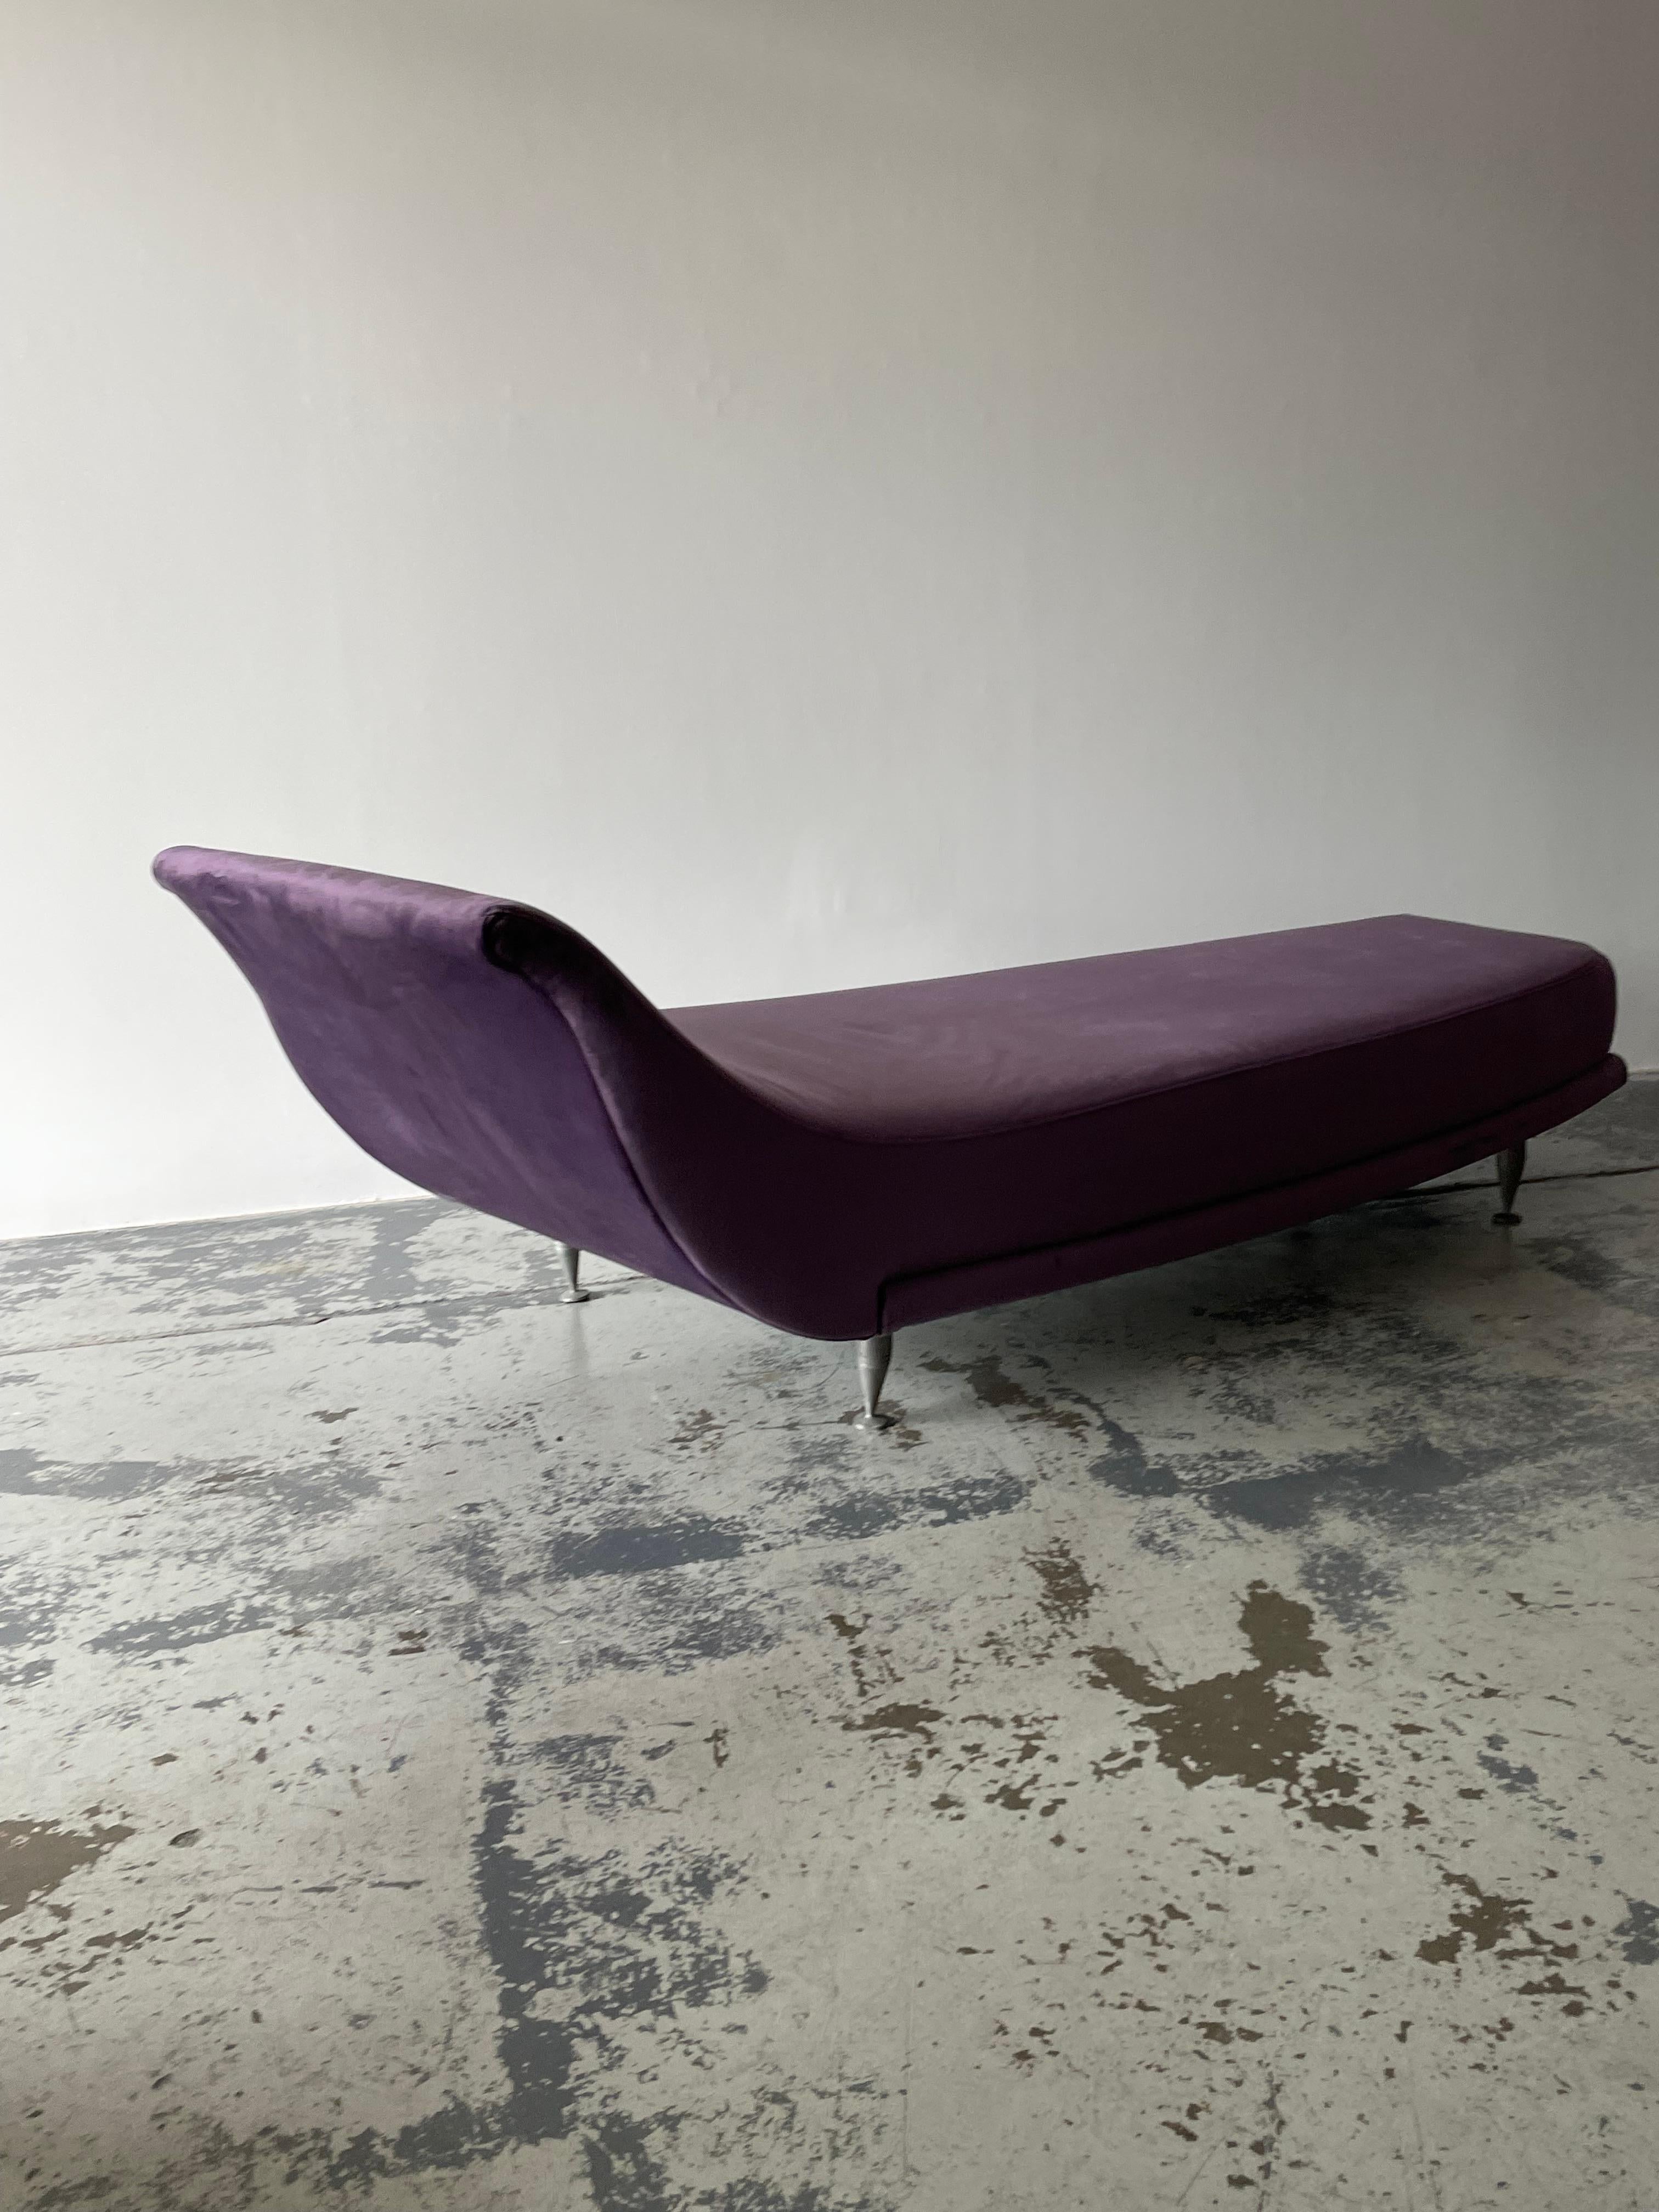 Late 20th Century Chaise Longue by Massimo Iosa Ghini Postmodern for Moroso Italy For Sale